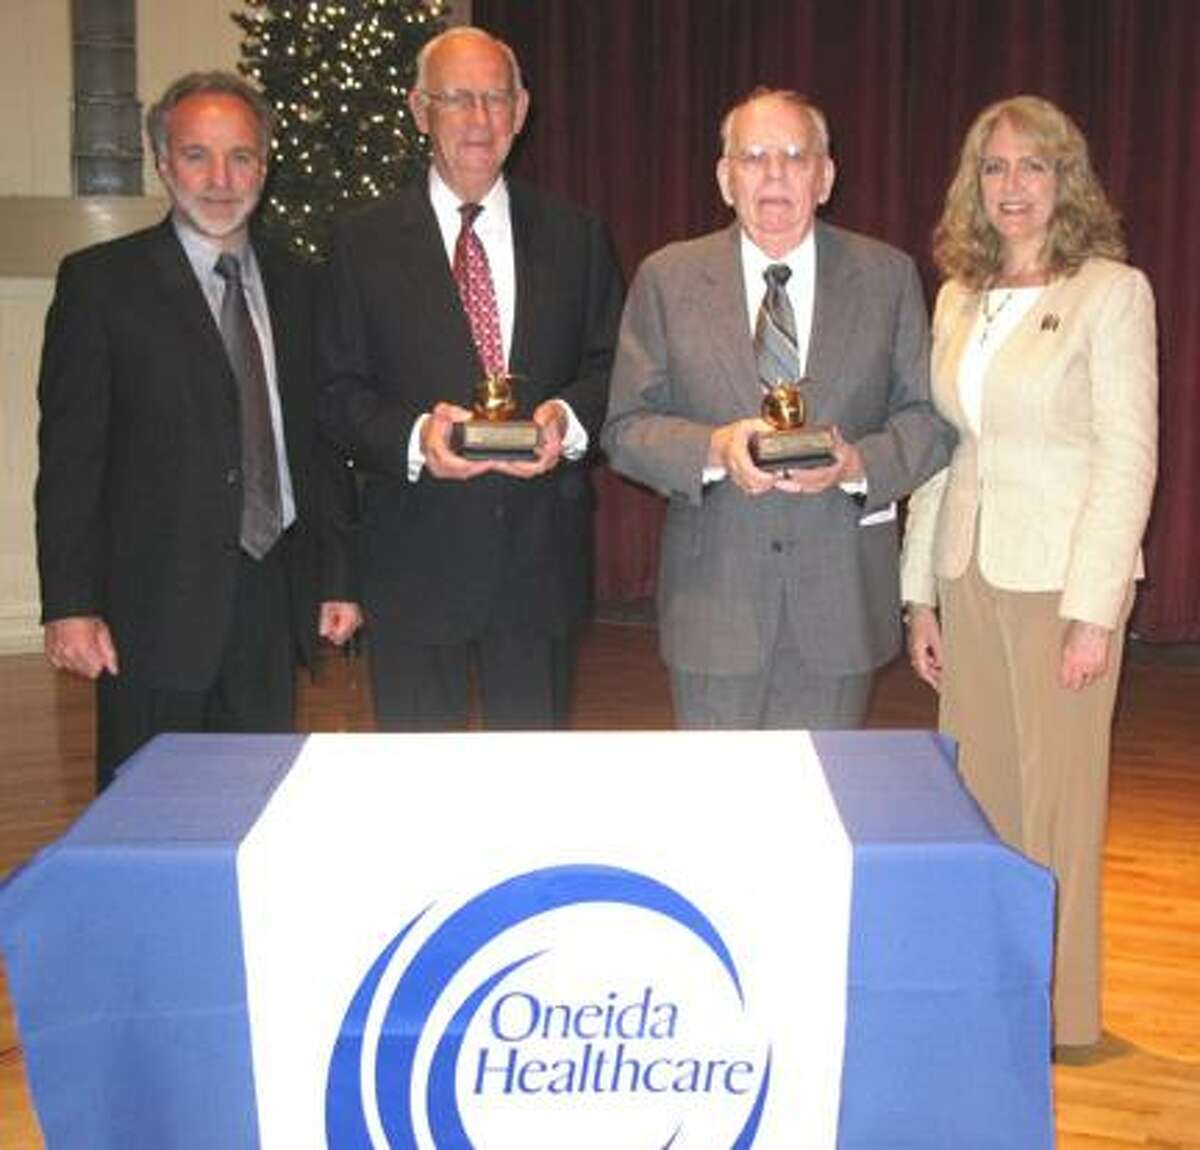 Pictured from left: Gene Morreale, president and CEO of Oneida Healthcare; James J. Devine Jr.; James L. Crowley; and Joanne Ernenwein, director of development Oneida Healthcare Foundation.